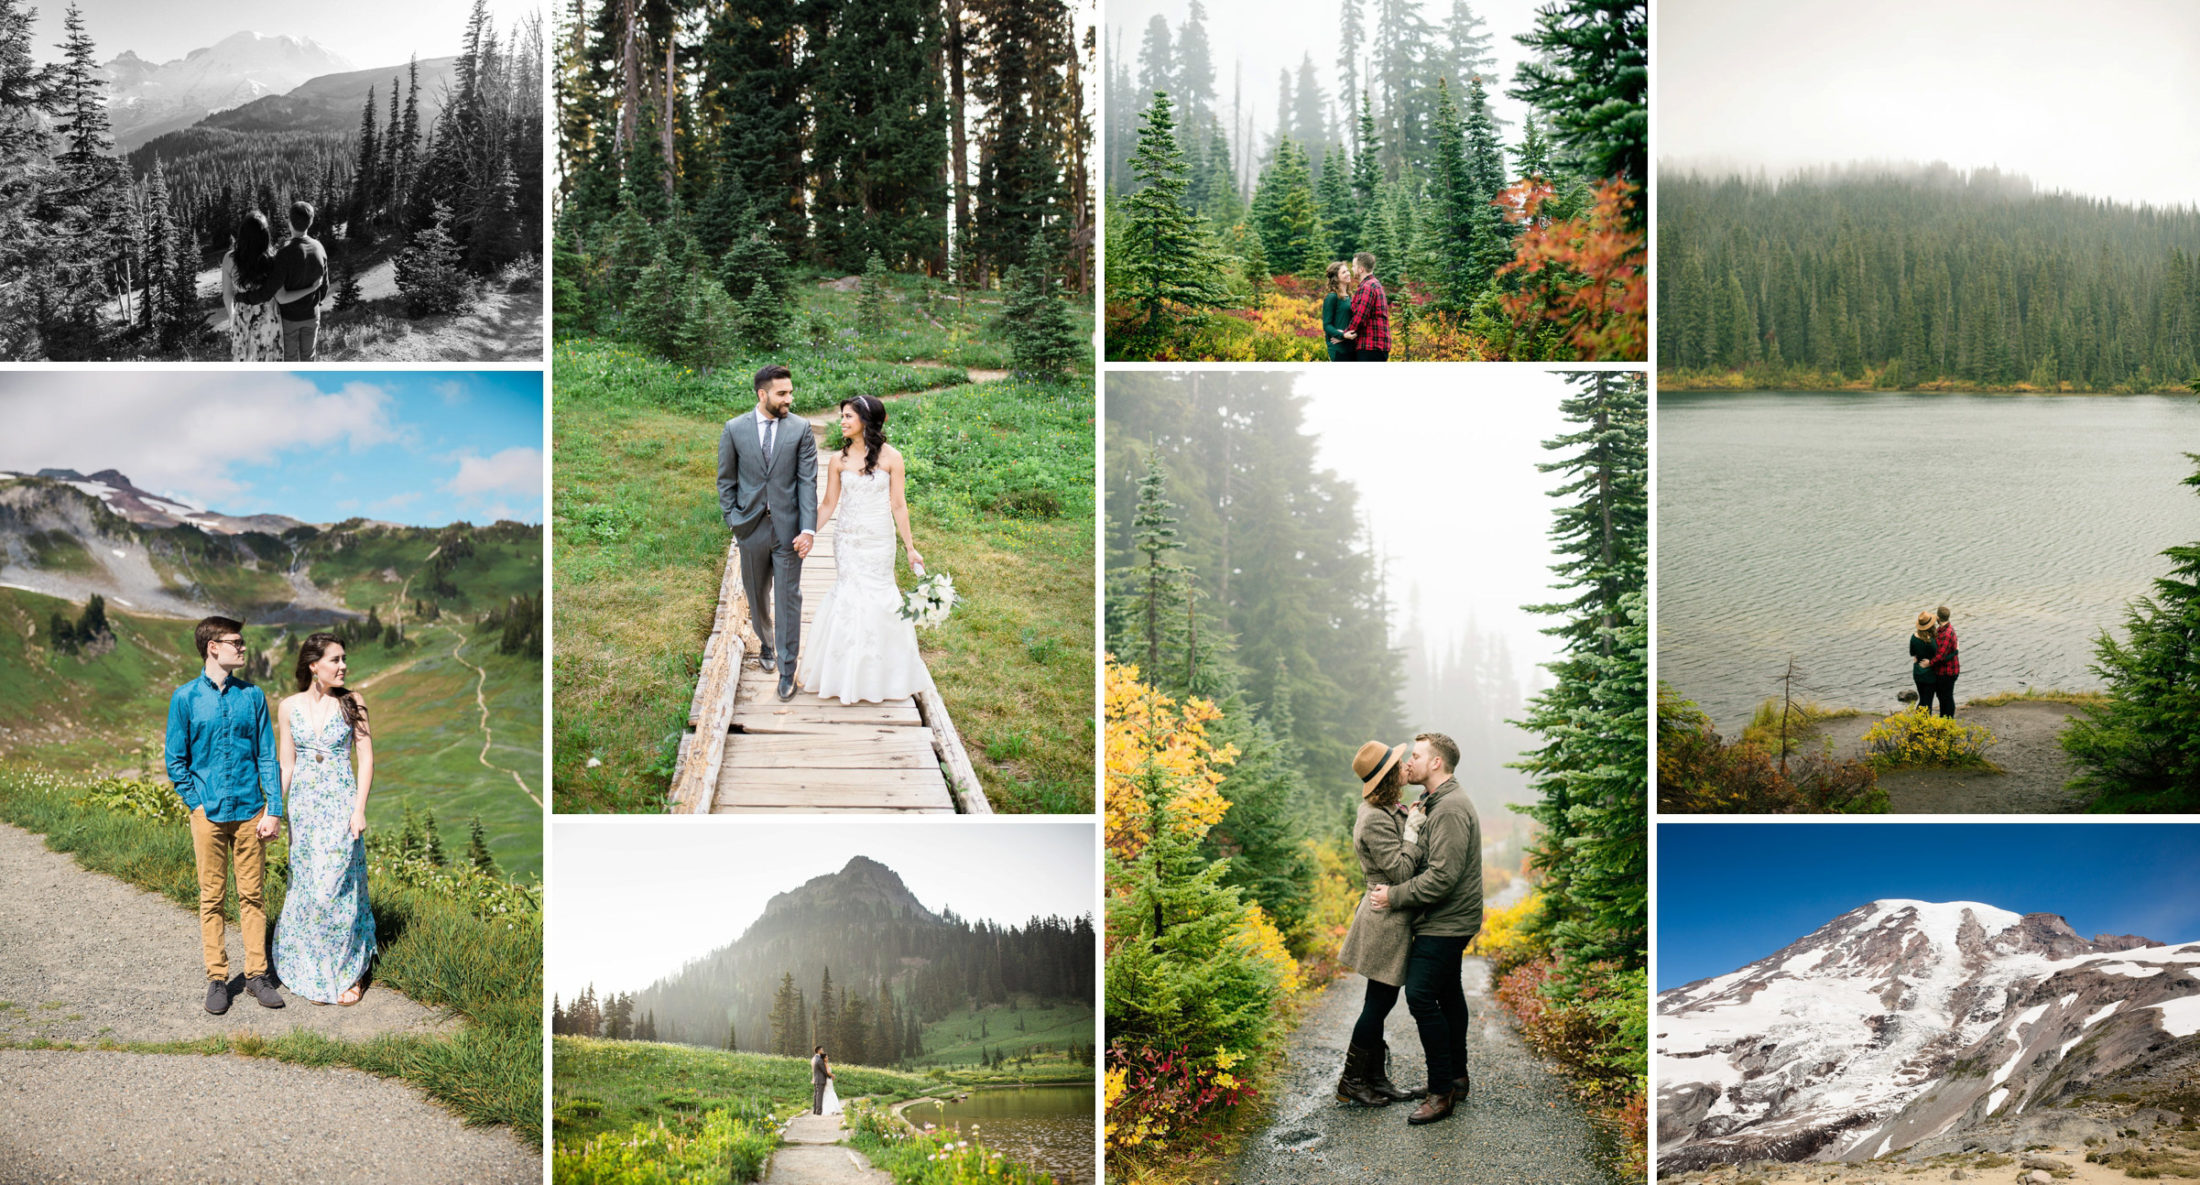 Mount Rainier National Park best places to elope for your adventure wedding.